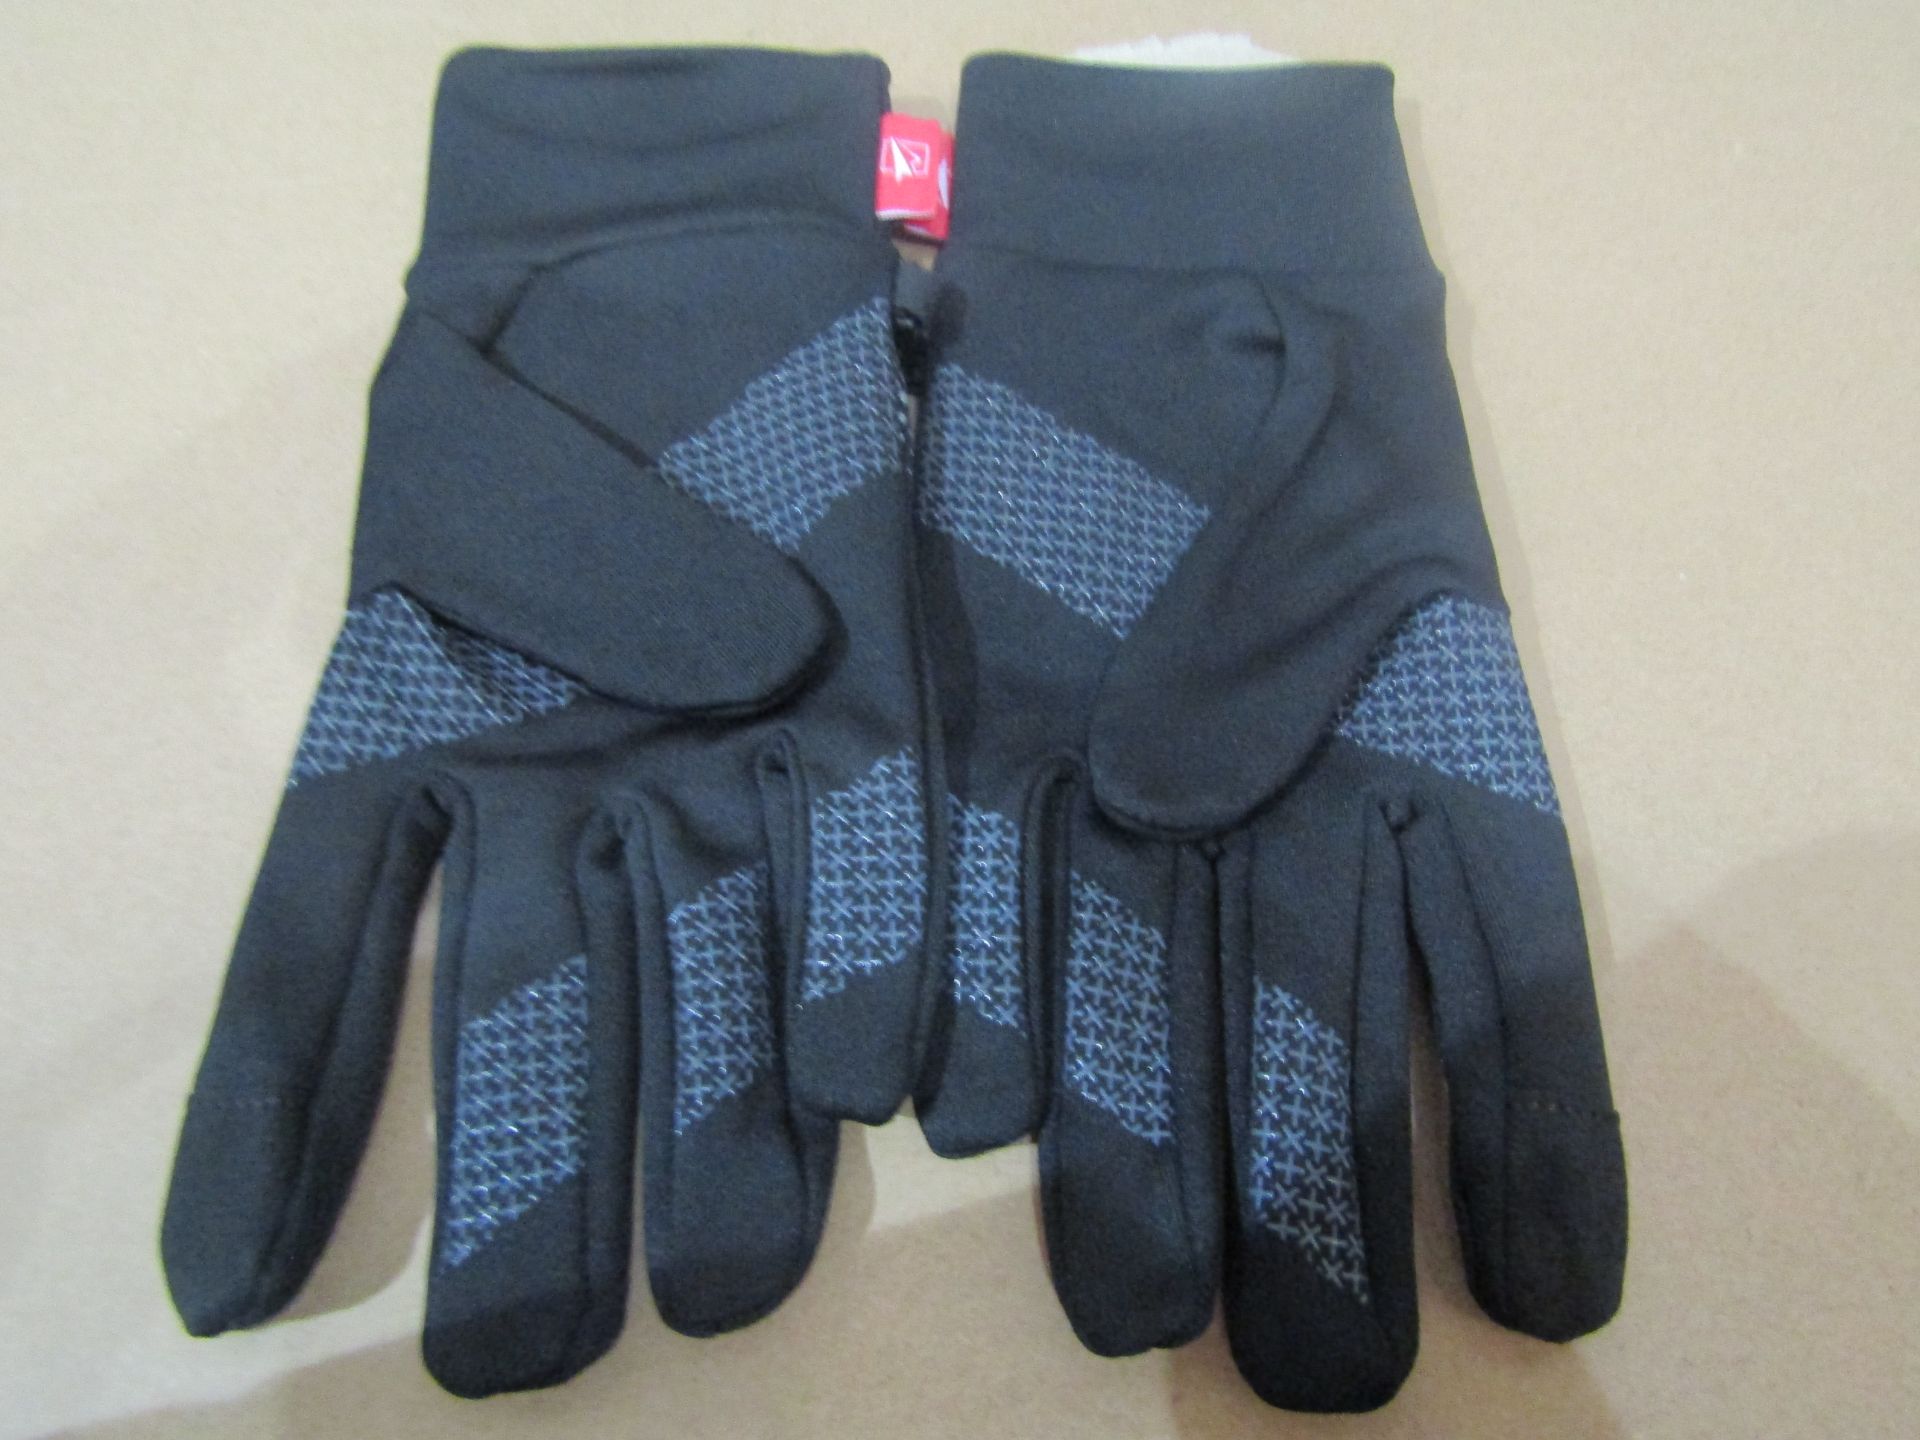 5 X Pairs of Unusex Sports Gloves Black Size L New & Packaged